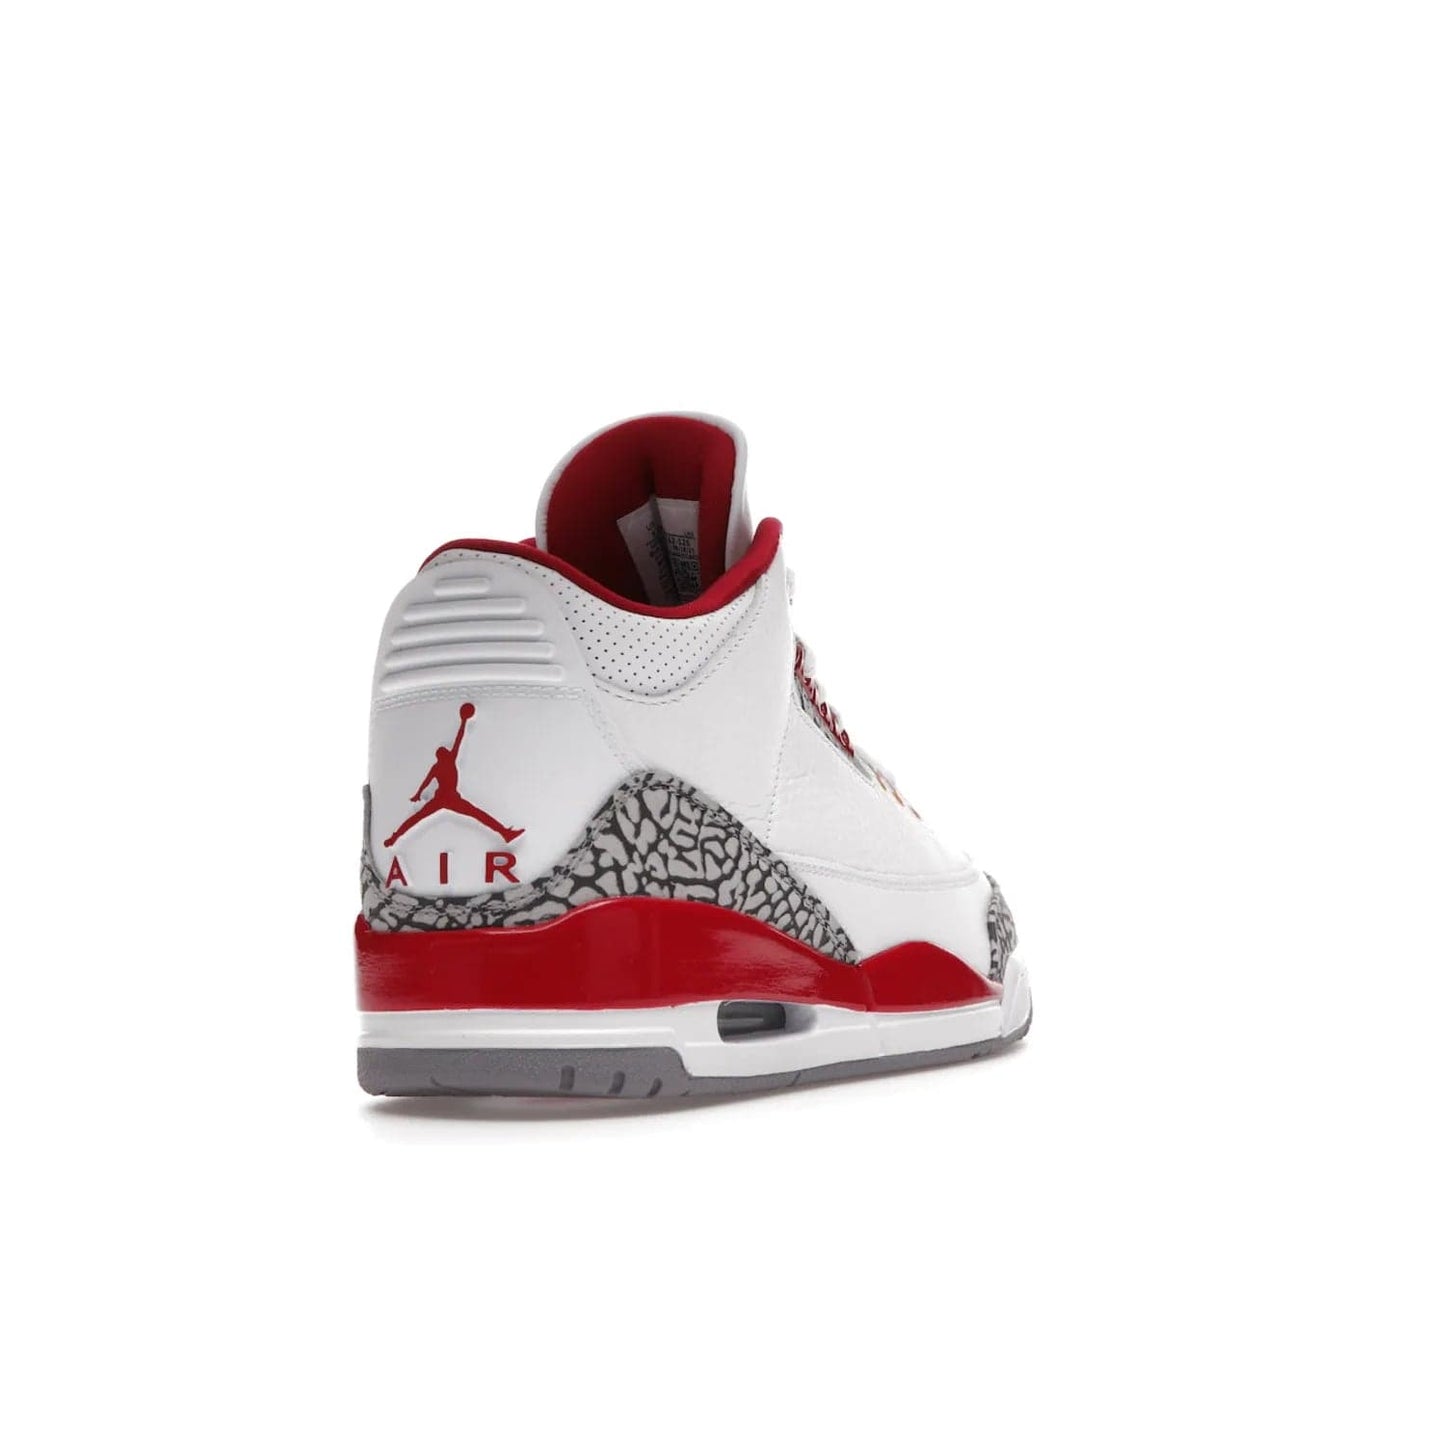 Jordan 3 Retro Cardinal Red - Image 31 - Only at www.BallersClubKickz.com - Air Jordan 3 Retro Cardinal Red combines classic style and modern appeal - white tumbled leather, signature Elephant Print overlays, cardinal red midsoles, Jumpman logo embroidery. Available Feb 2022.